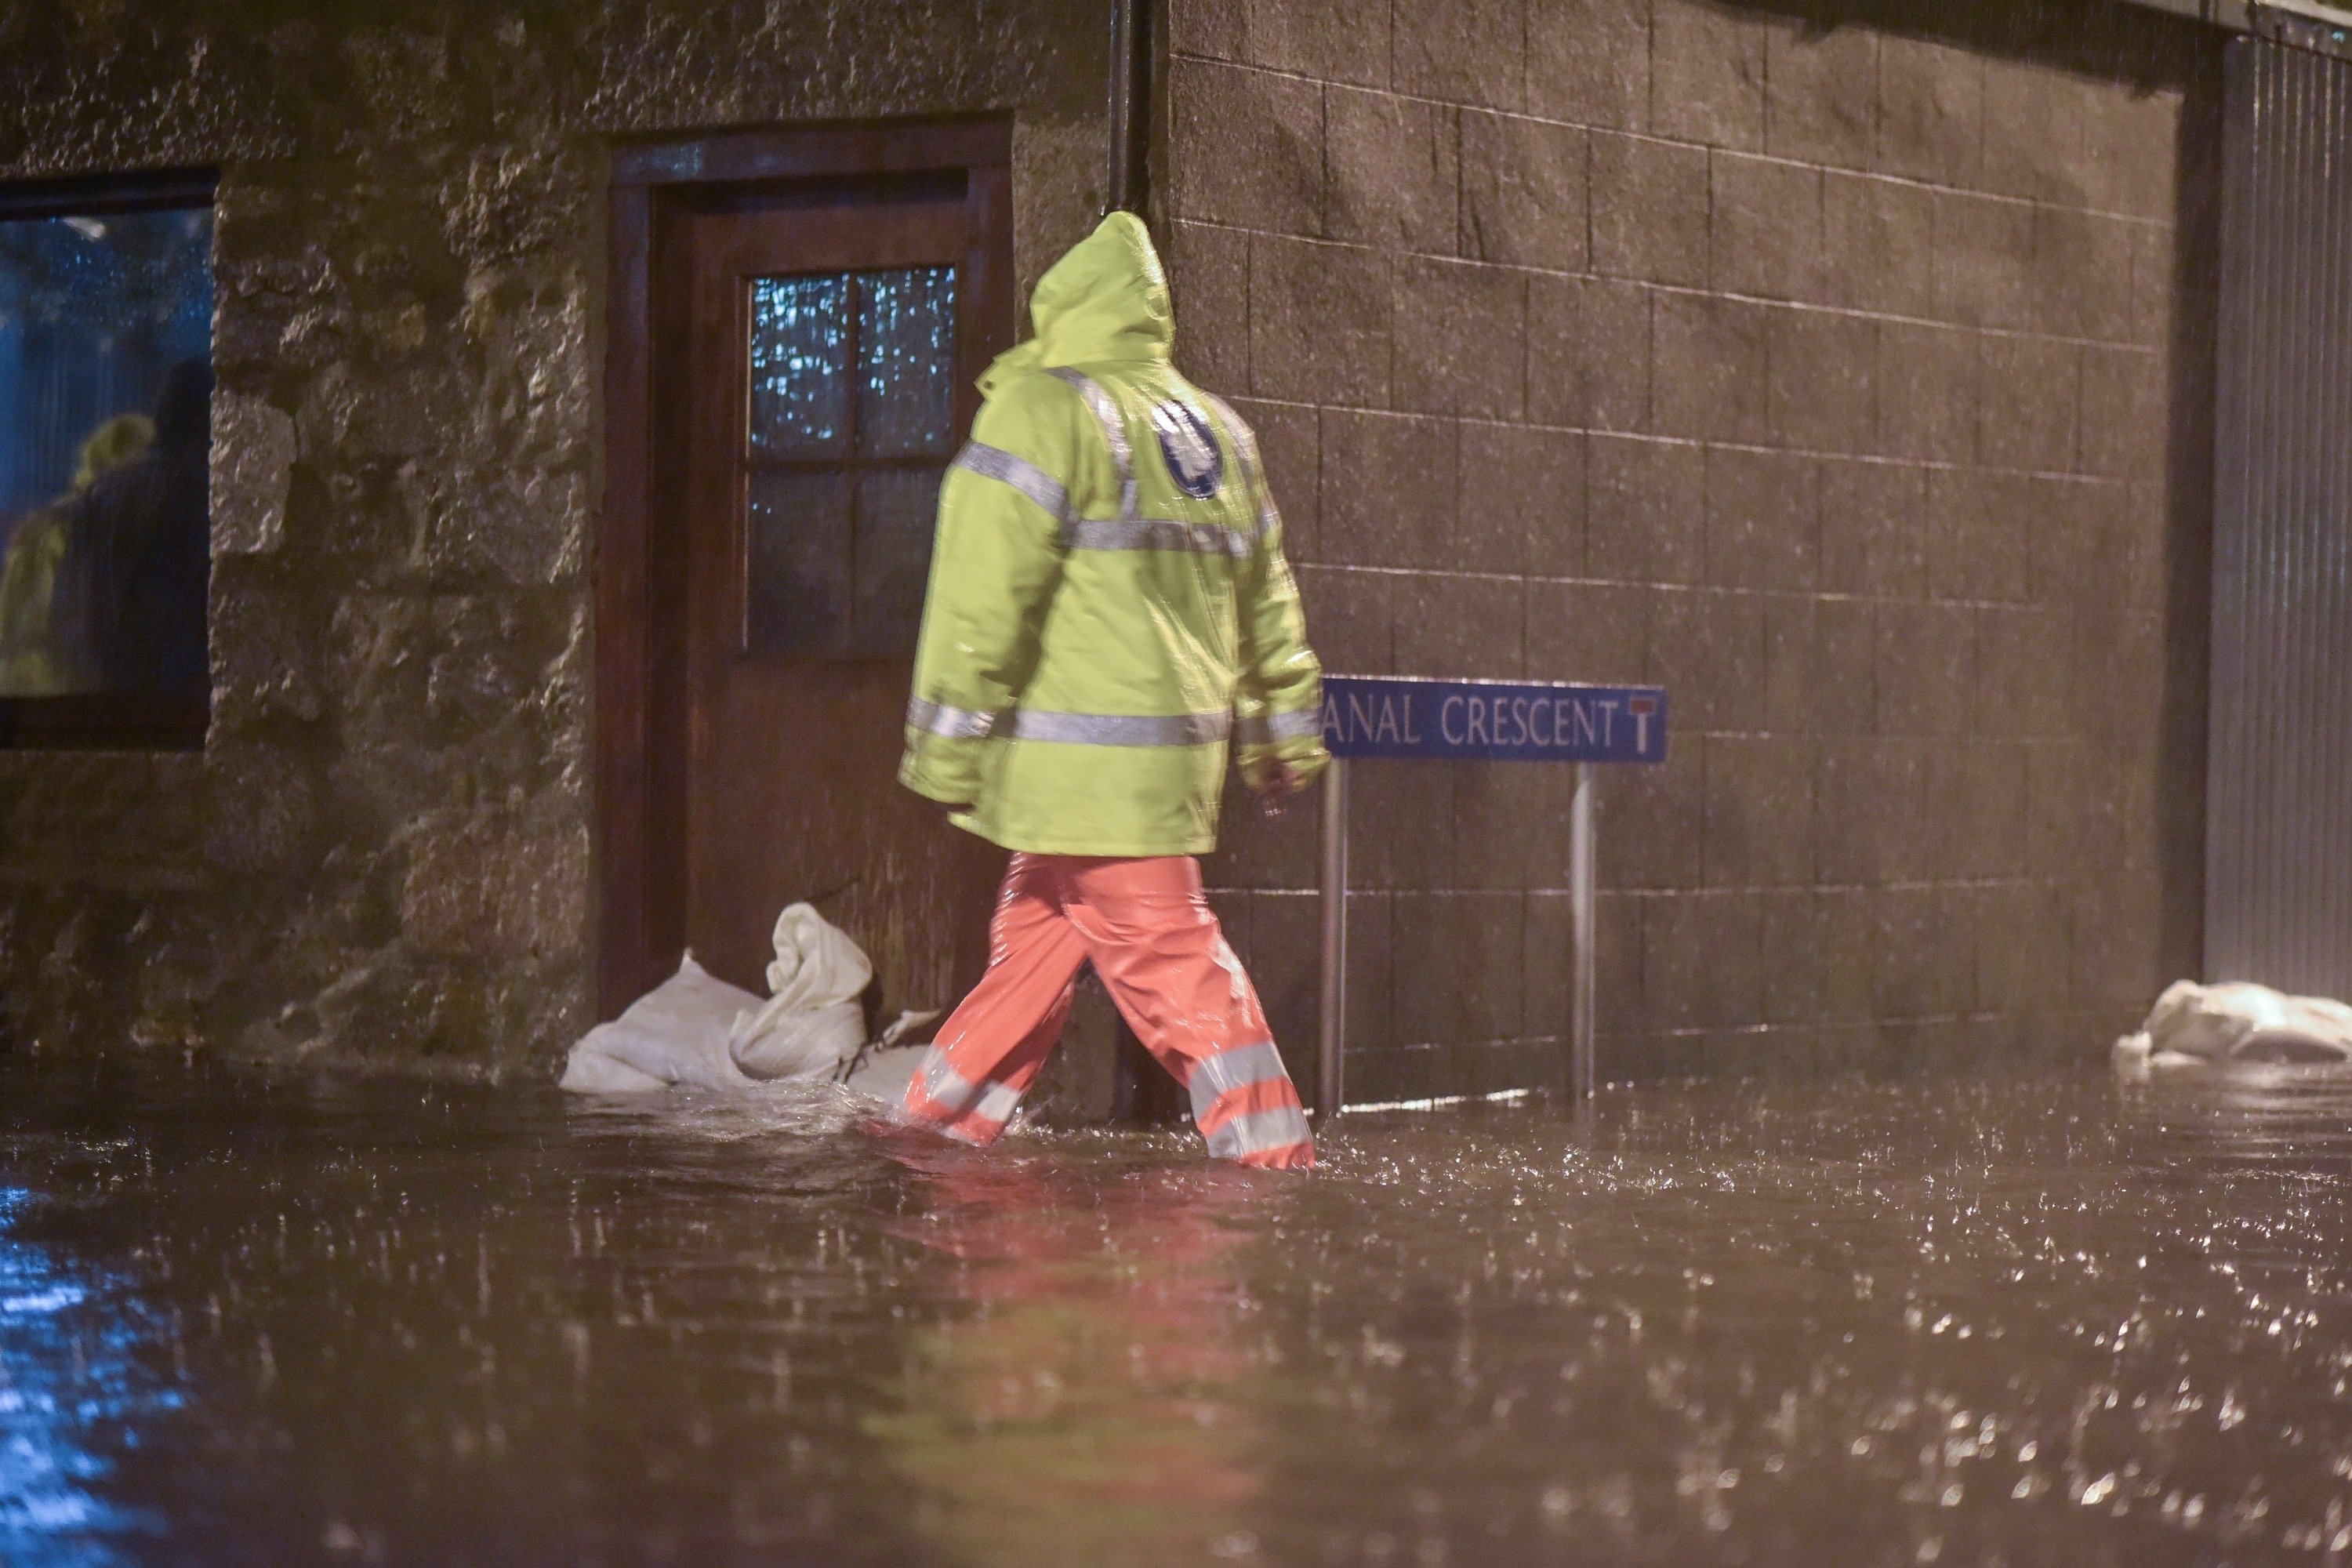 Men search homes in the Port Elphinstone area of Inverurie, Aberdeenshire as they begin to experience flooding after the River Don burst its banks on January 07 2016. Scottish Envornmental Protection Agency (SEPA) have issued two severe flood warnings for both Inverurie and Kintore, both in Aberdeenshire.